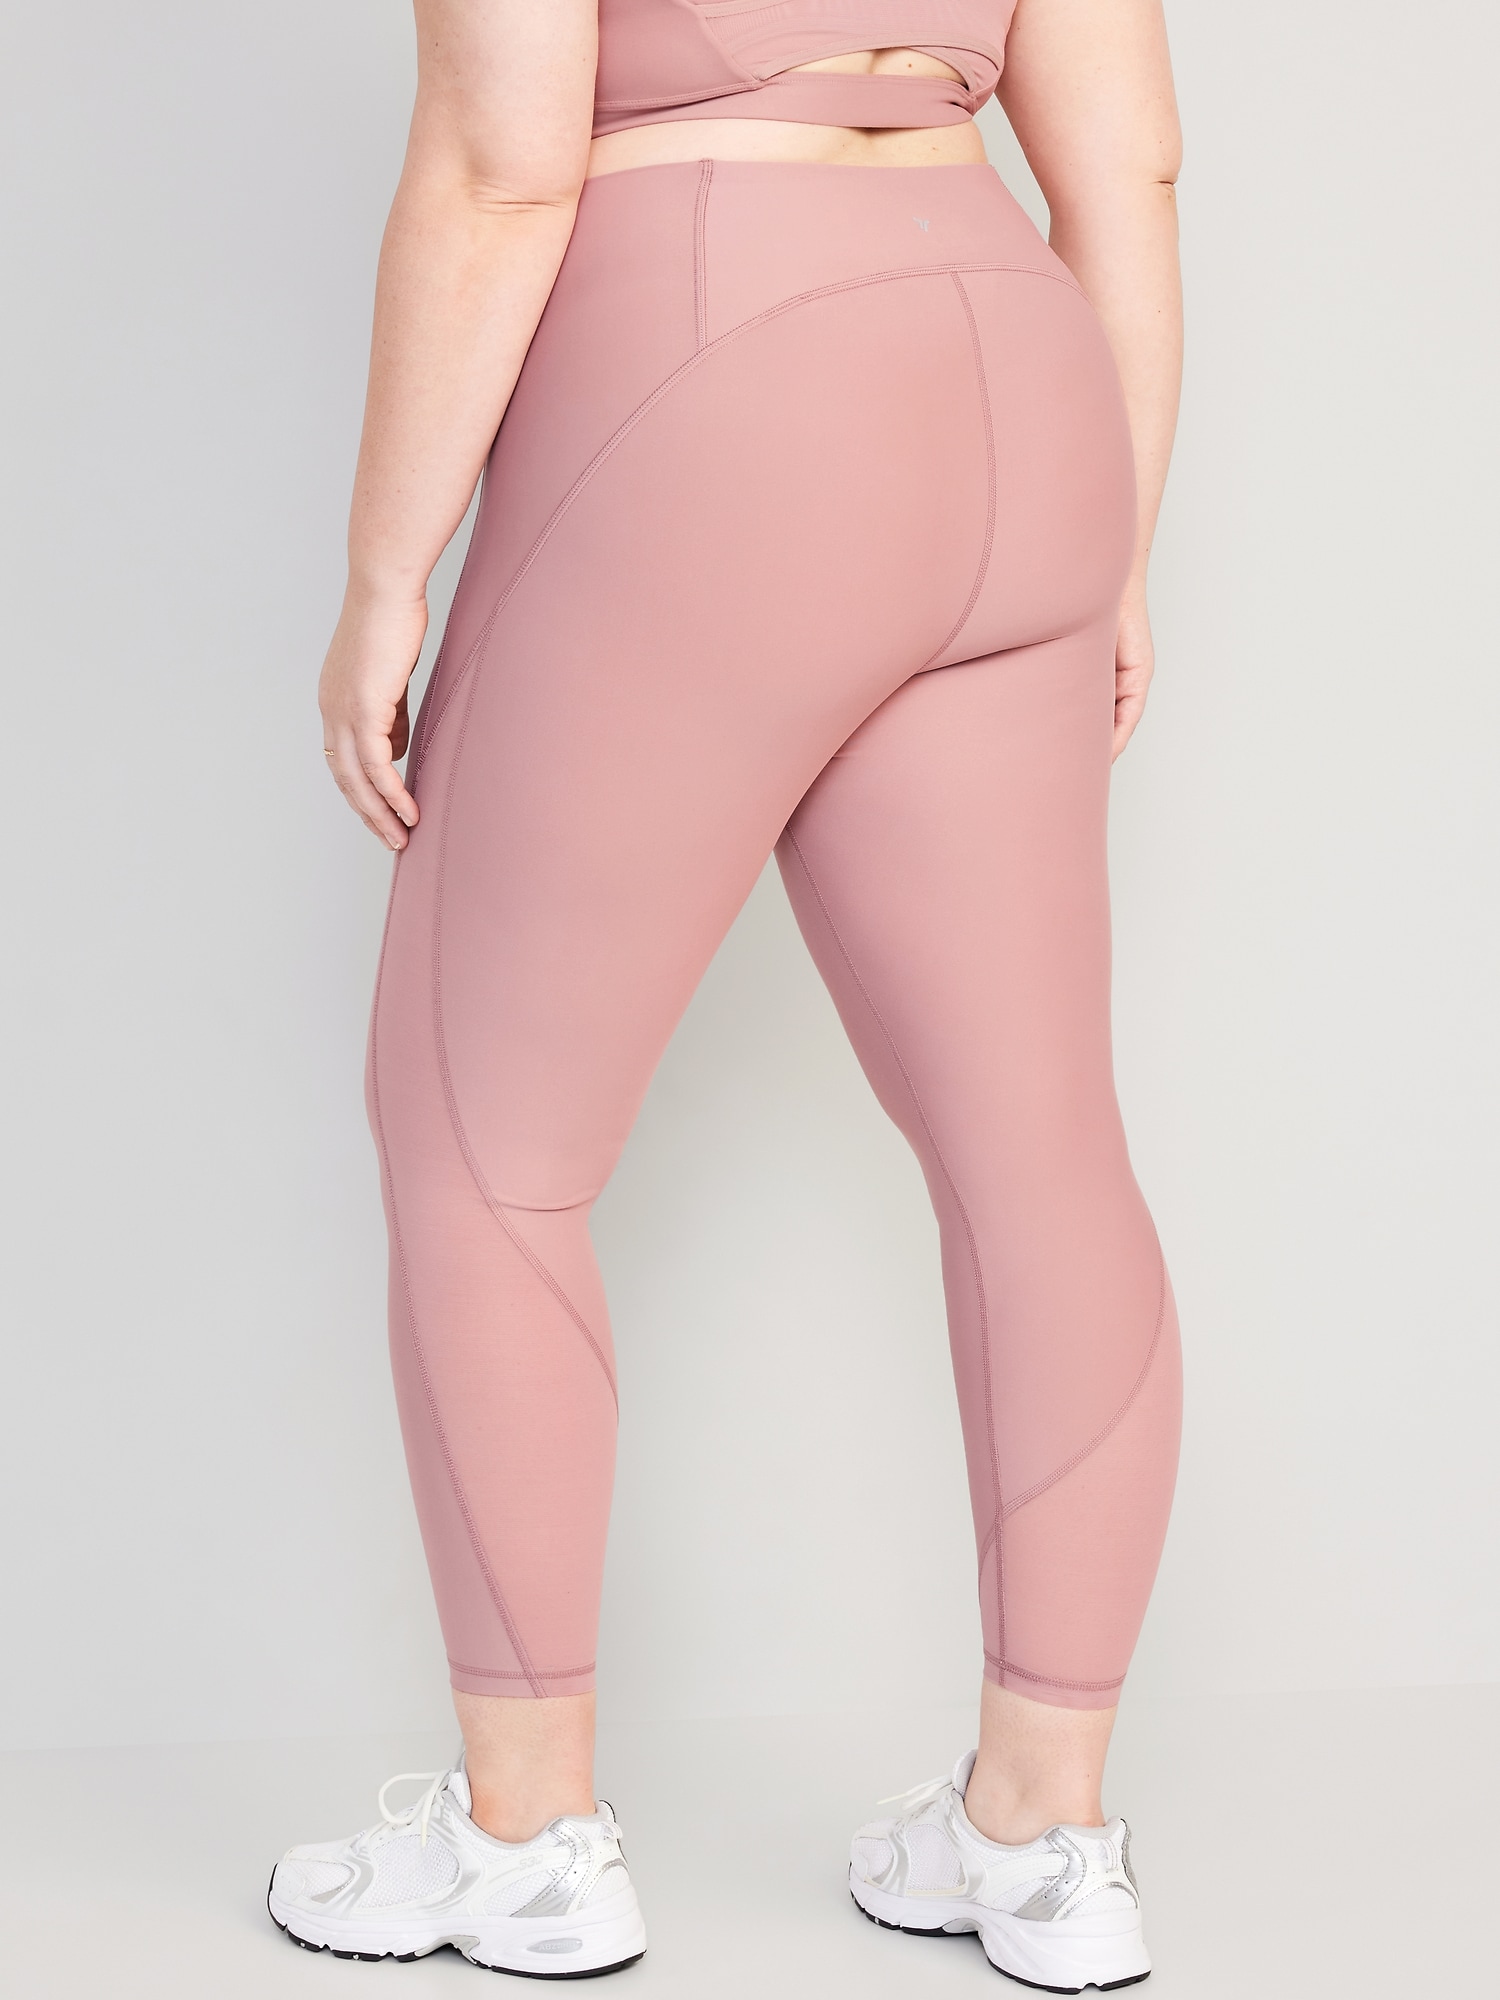 Fabletics On-the-Go High-Waisted Mesh Legging Womens plus Size 4X